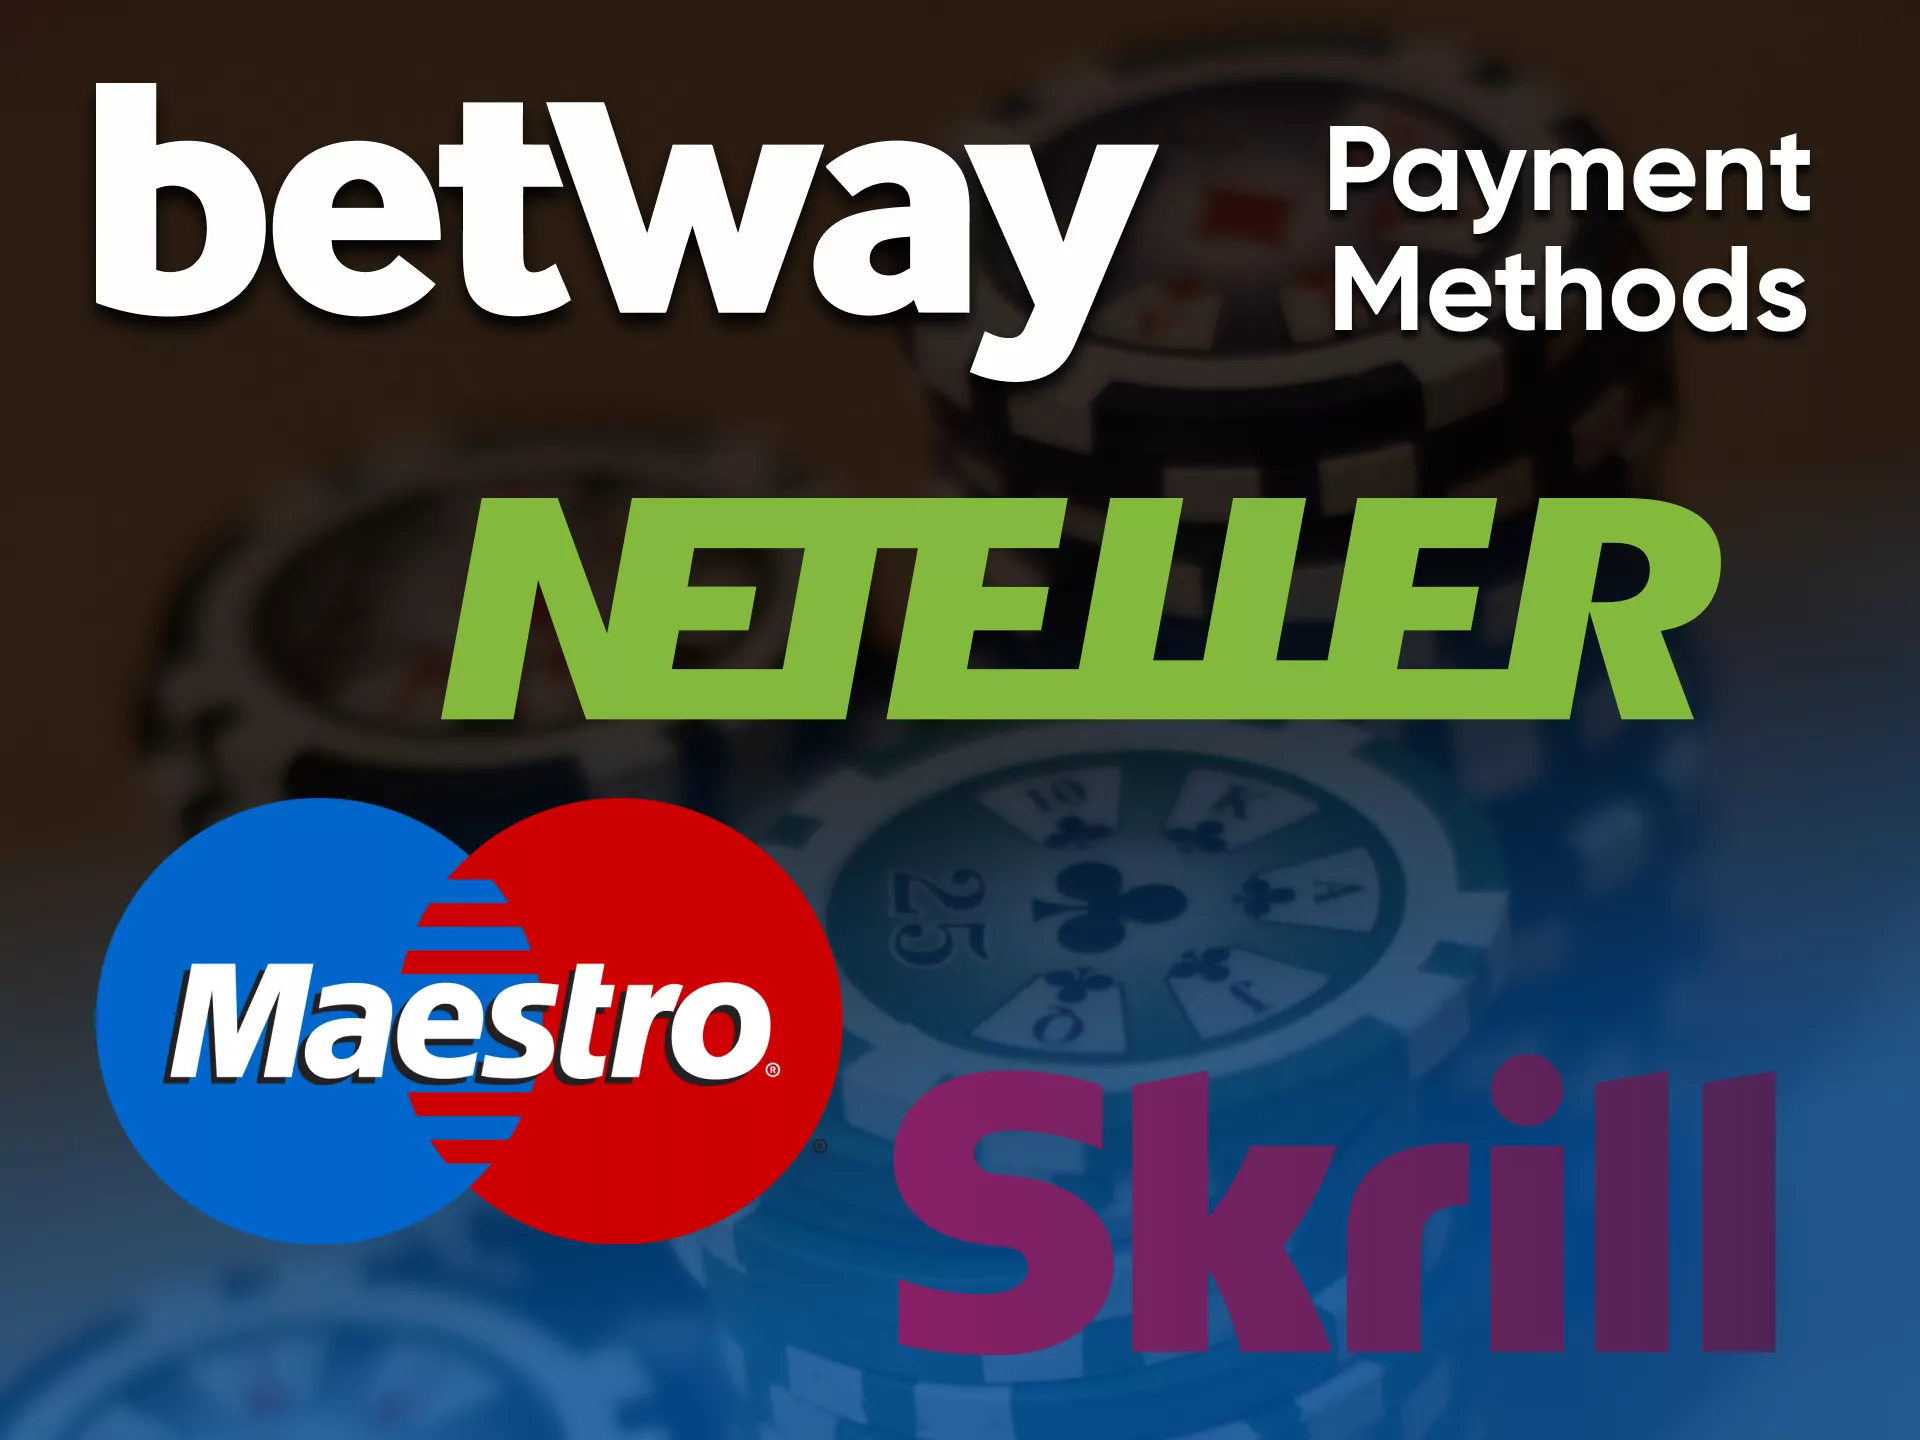 Make a deposit your convenient way at Betway.